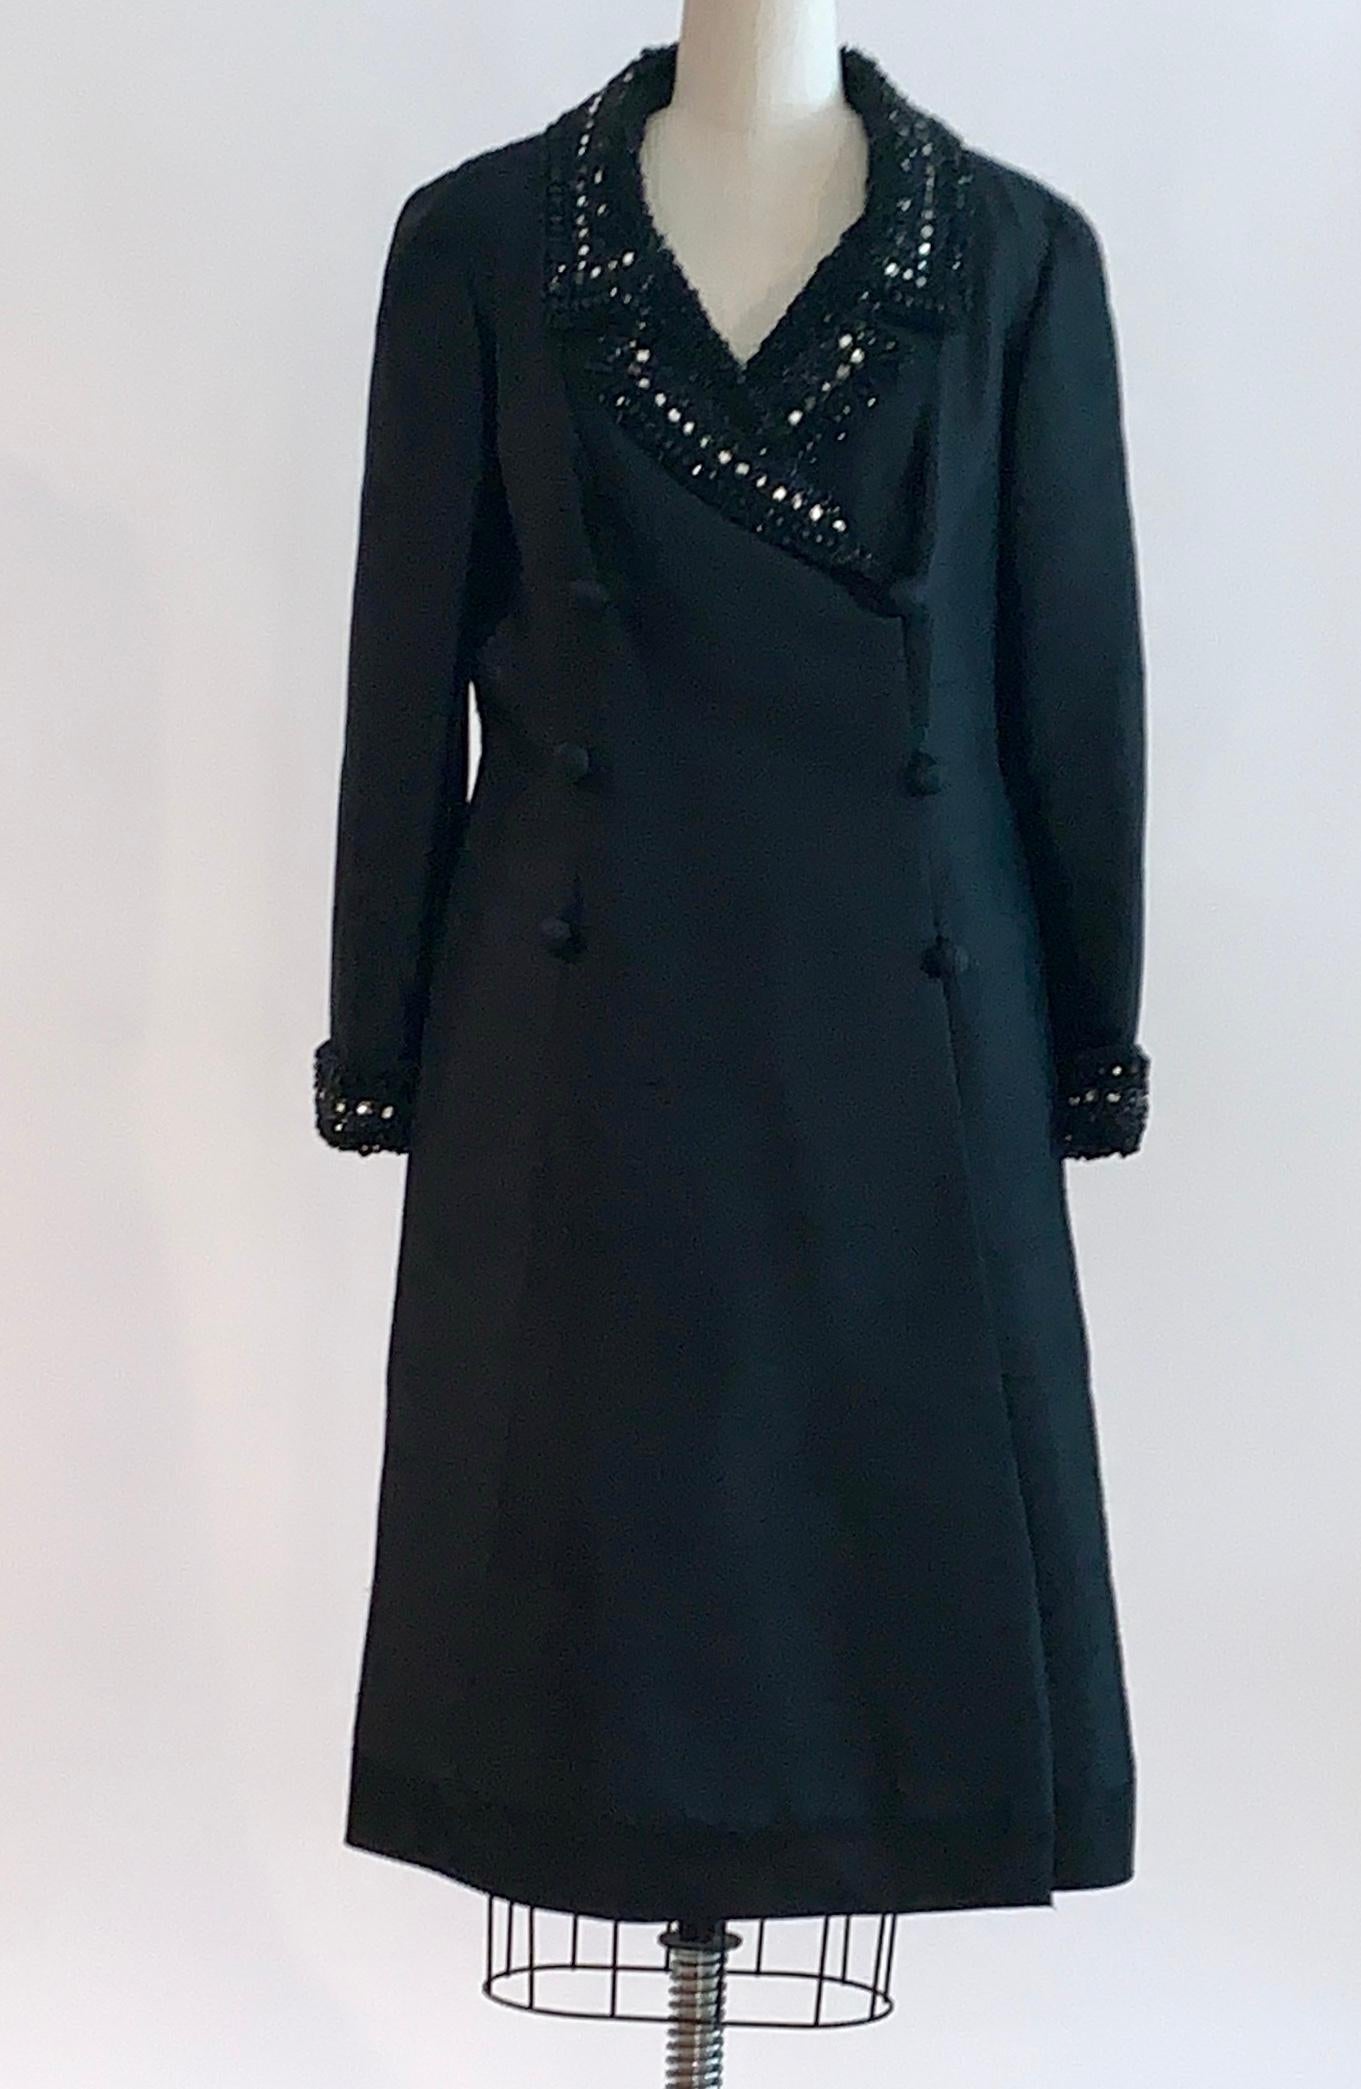 Jean Lutece vintage 1960s black silk double breasted coat (or coat dress) with black rhinestone and seed bead embellishment at collar and cuffs. Raw silk features natural slubbing throughout.  Smooth black trim at bottom. Fastens with an interior